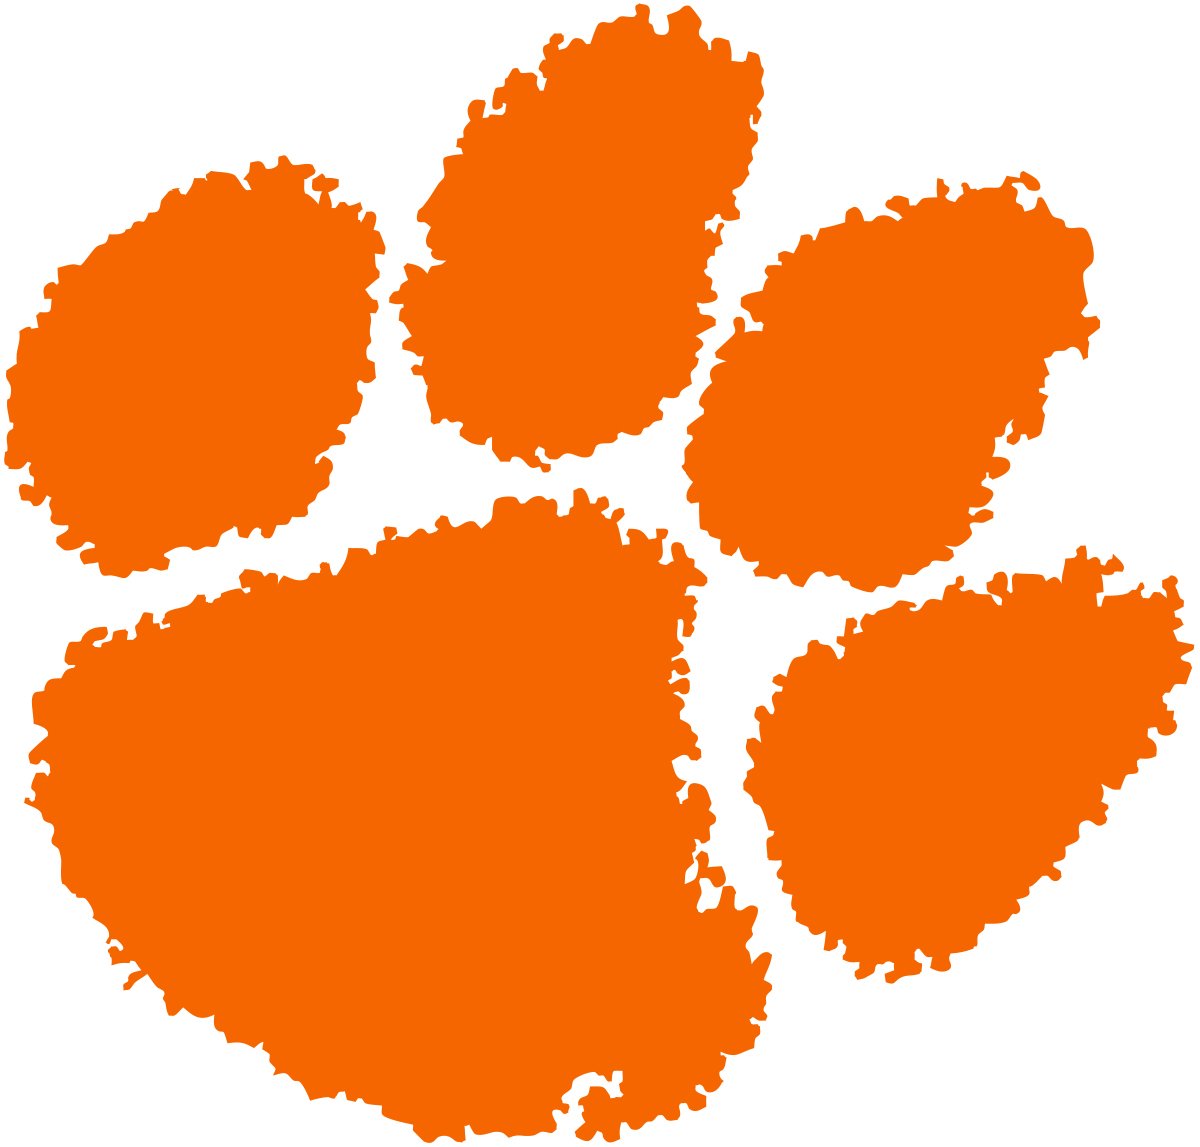 Clemson Tigers Color Codes Hex, RGB, and CMYK - Team Color Codes